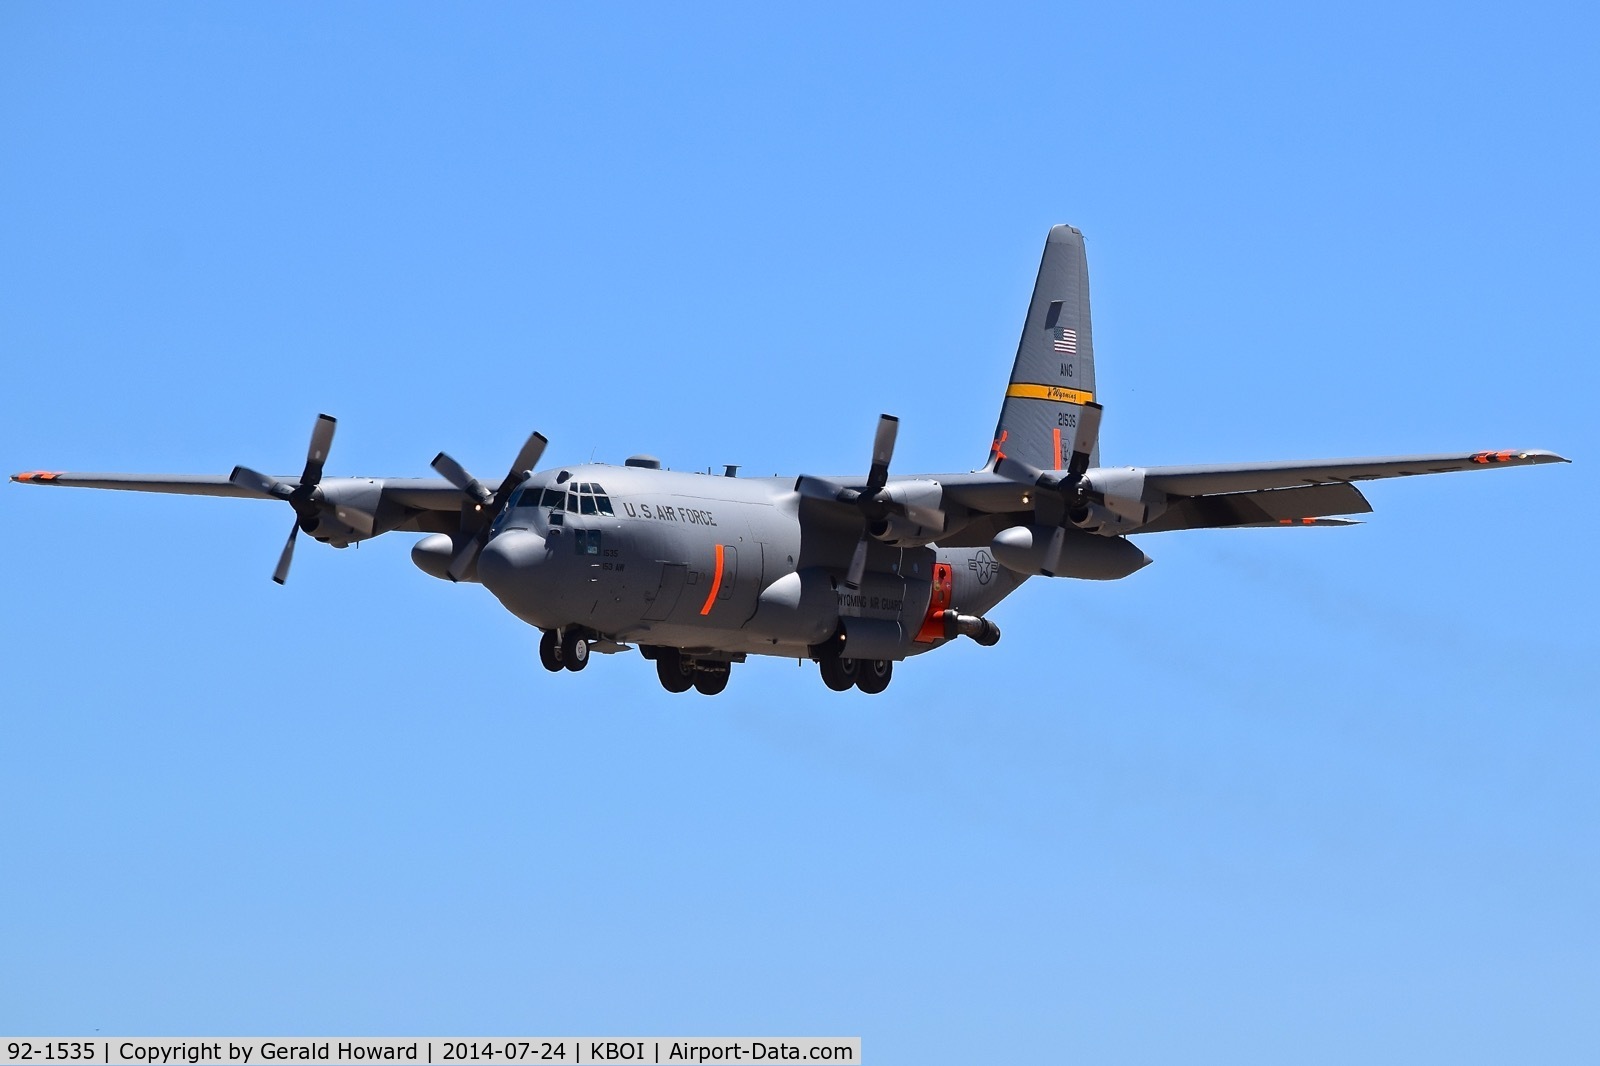 92-1535, 1992 Lockheed C-130H Hercules C/N 382-5324, Approach RWY 28L.  153rd Airlift Wing, WY ANG